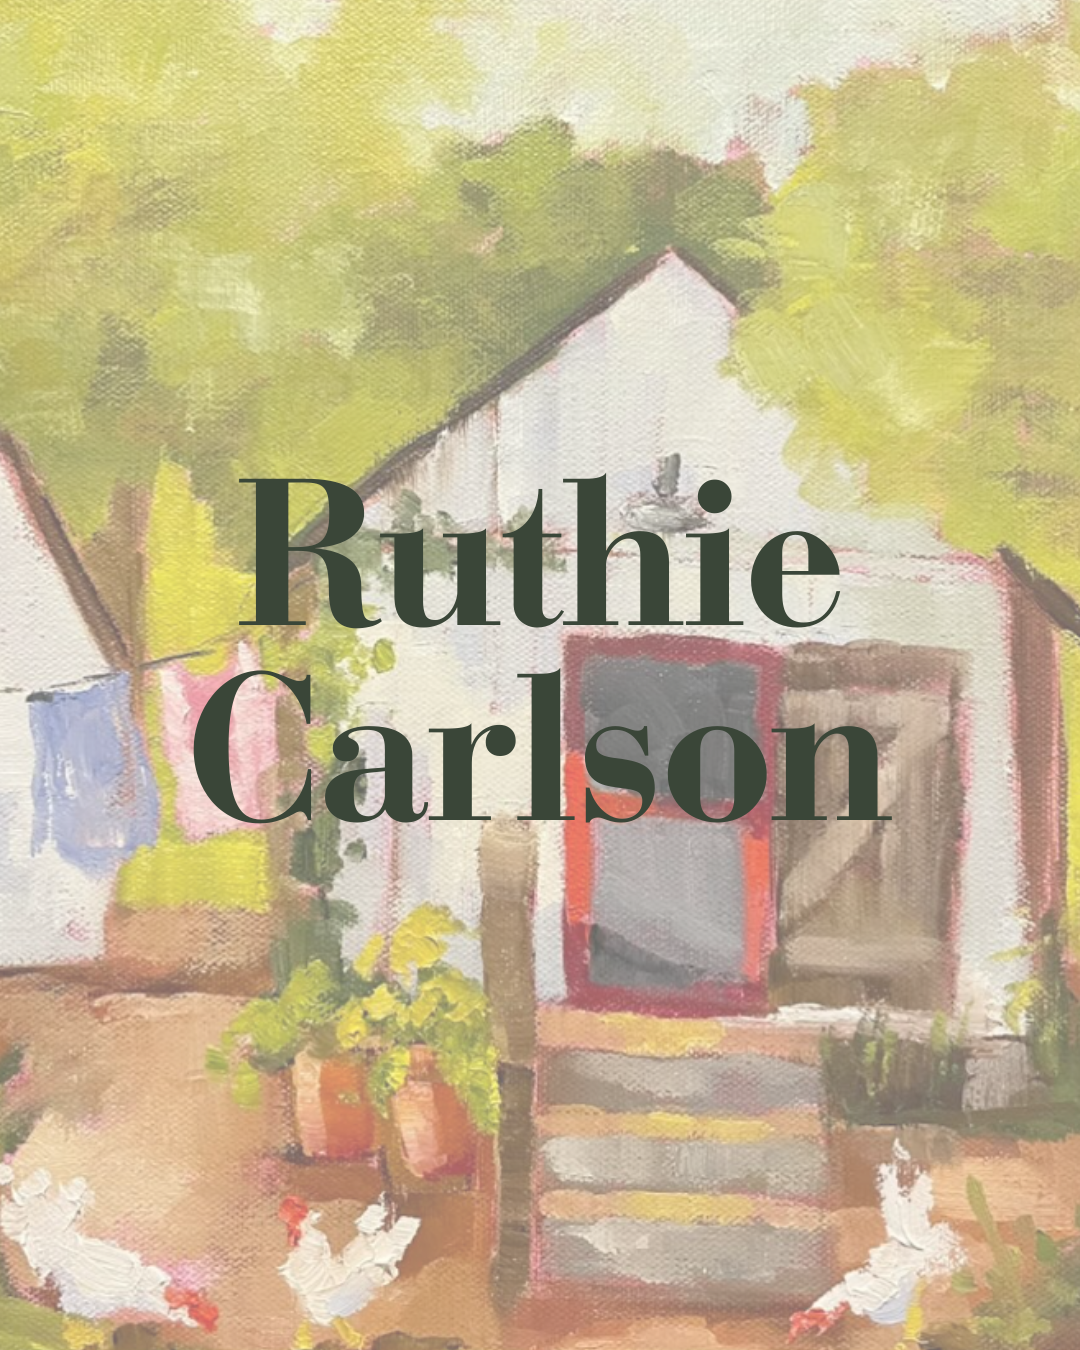 Ruthie Carlson painting with text overlay that reads ruthie carlson